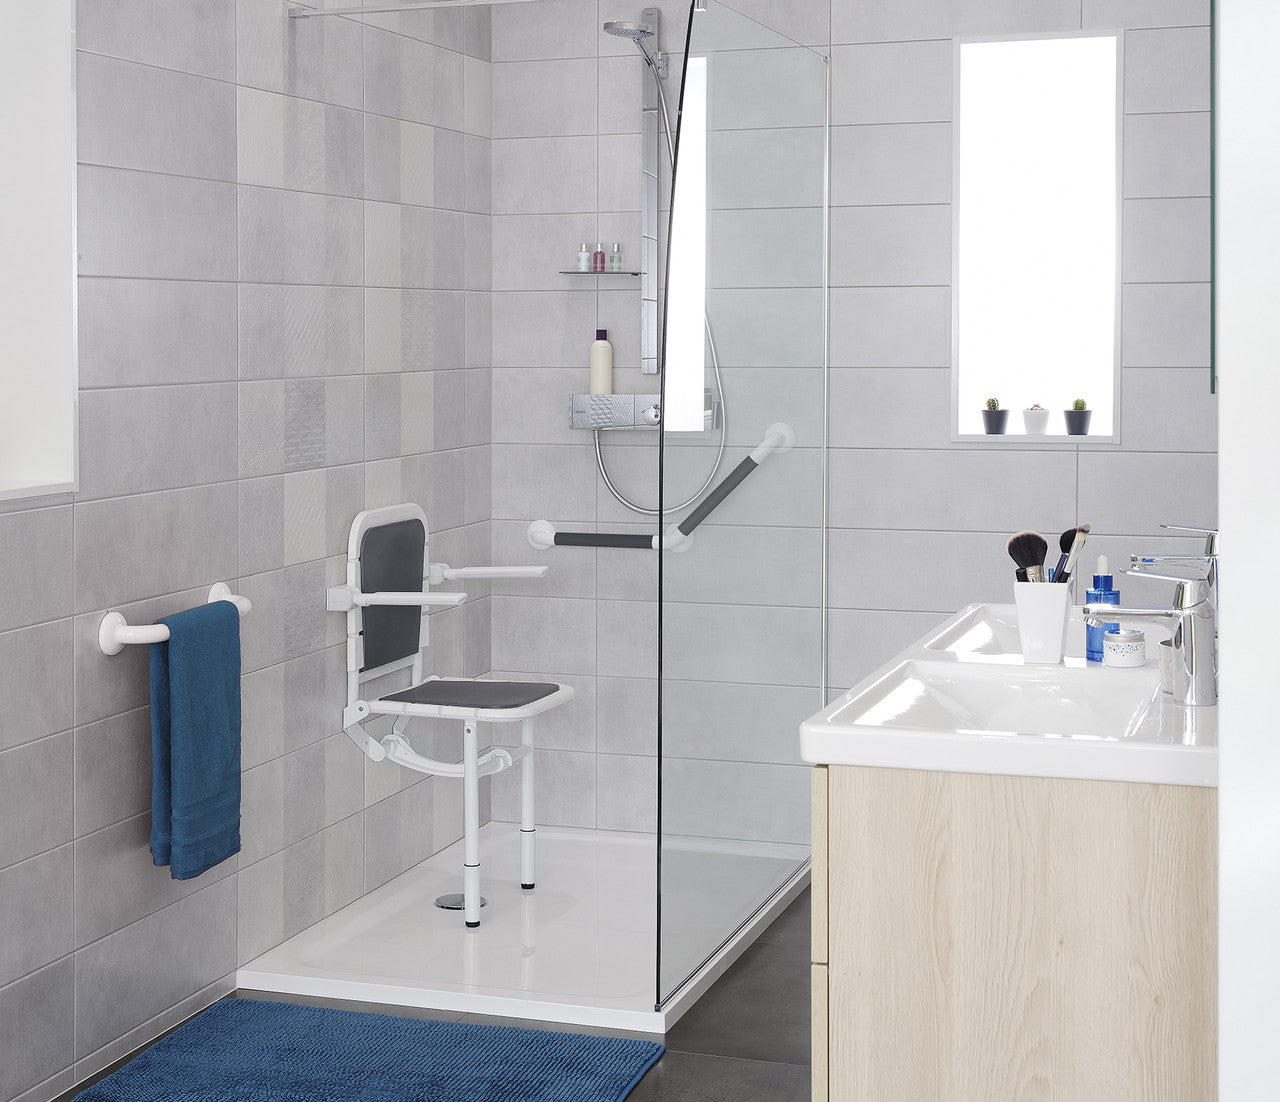 Comfortique adjustable height wall mounted foldaway shower chair & matching back rest and hinged arms